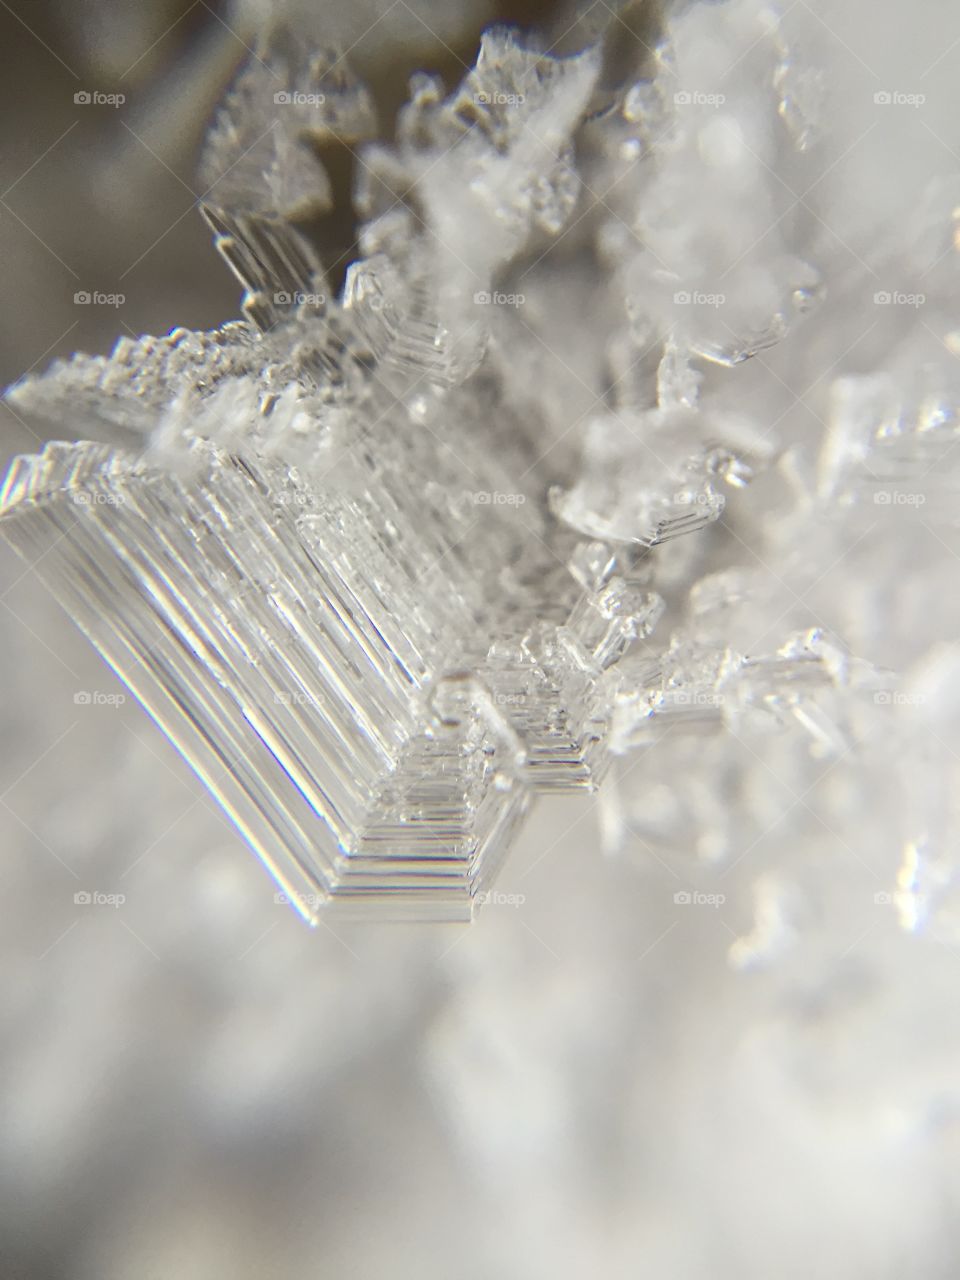 Extreme close-up of ice crystal